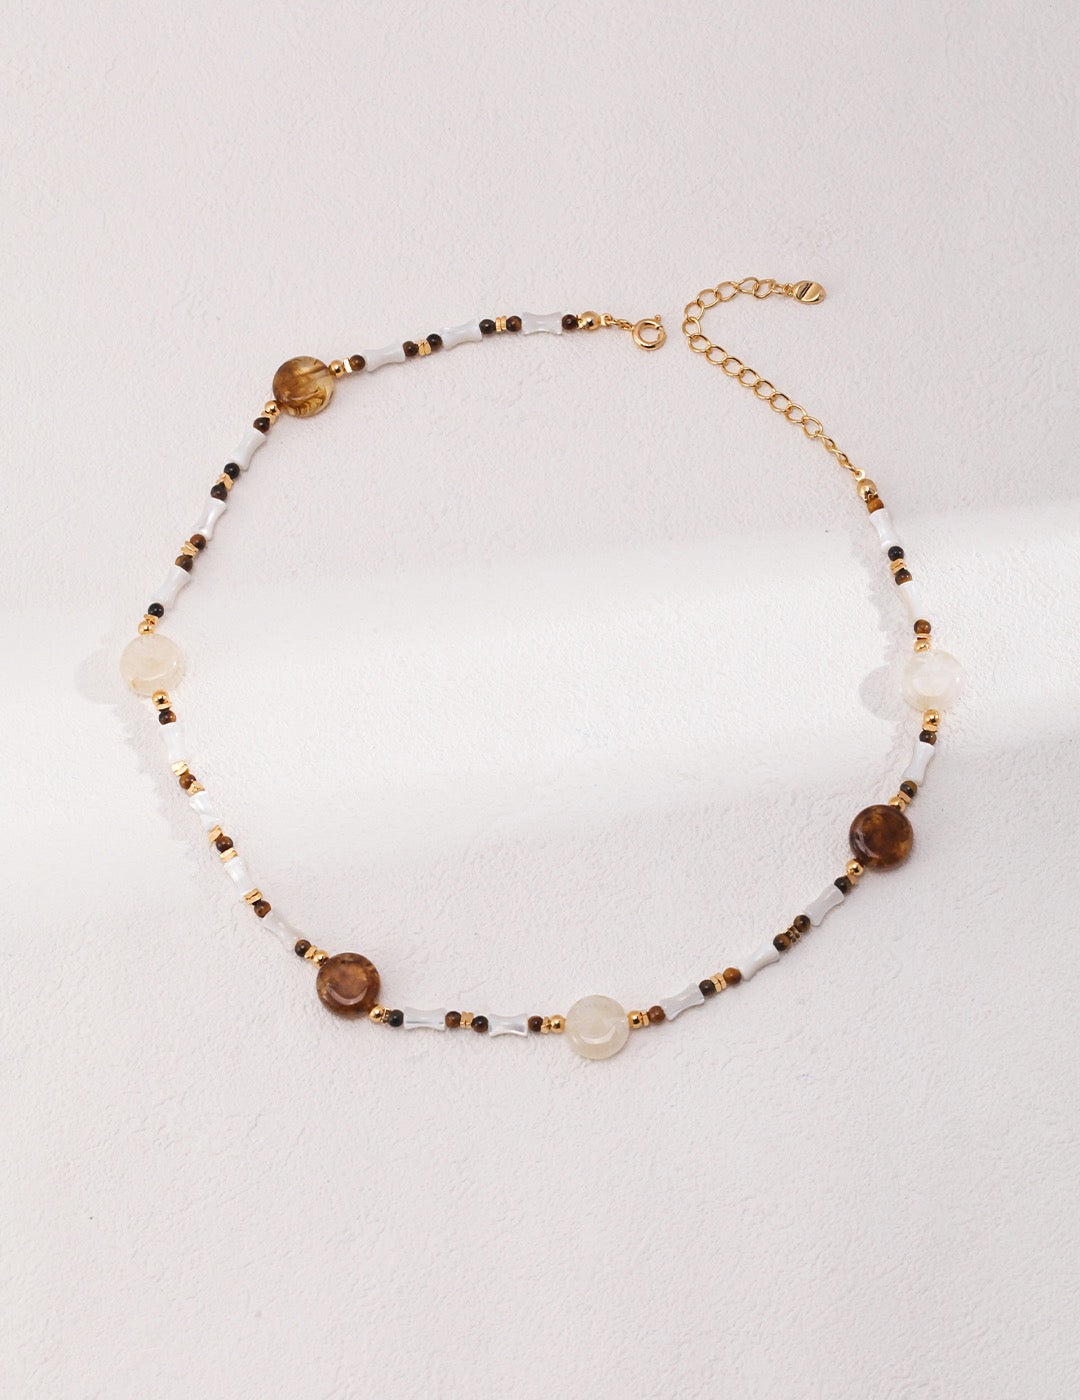 Oceanic Serenity: Silver Tiger's Eye Seashell Necklace